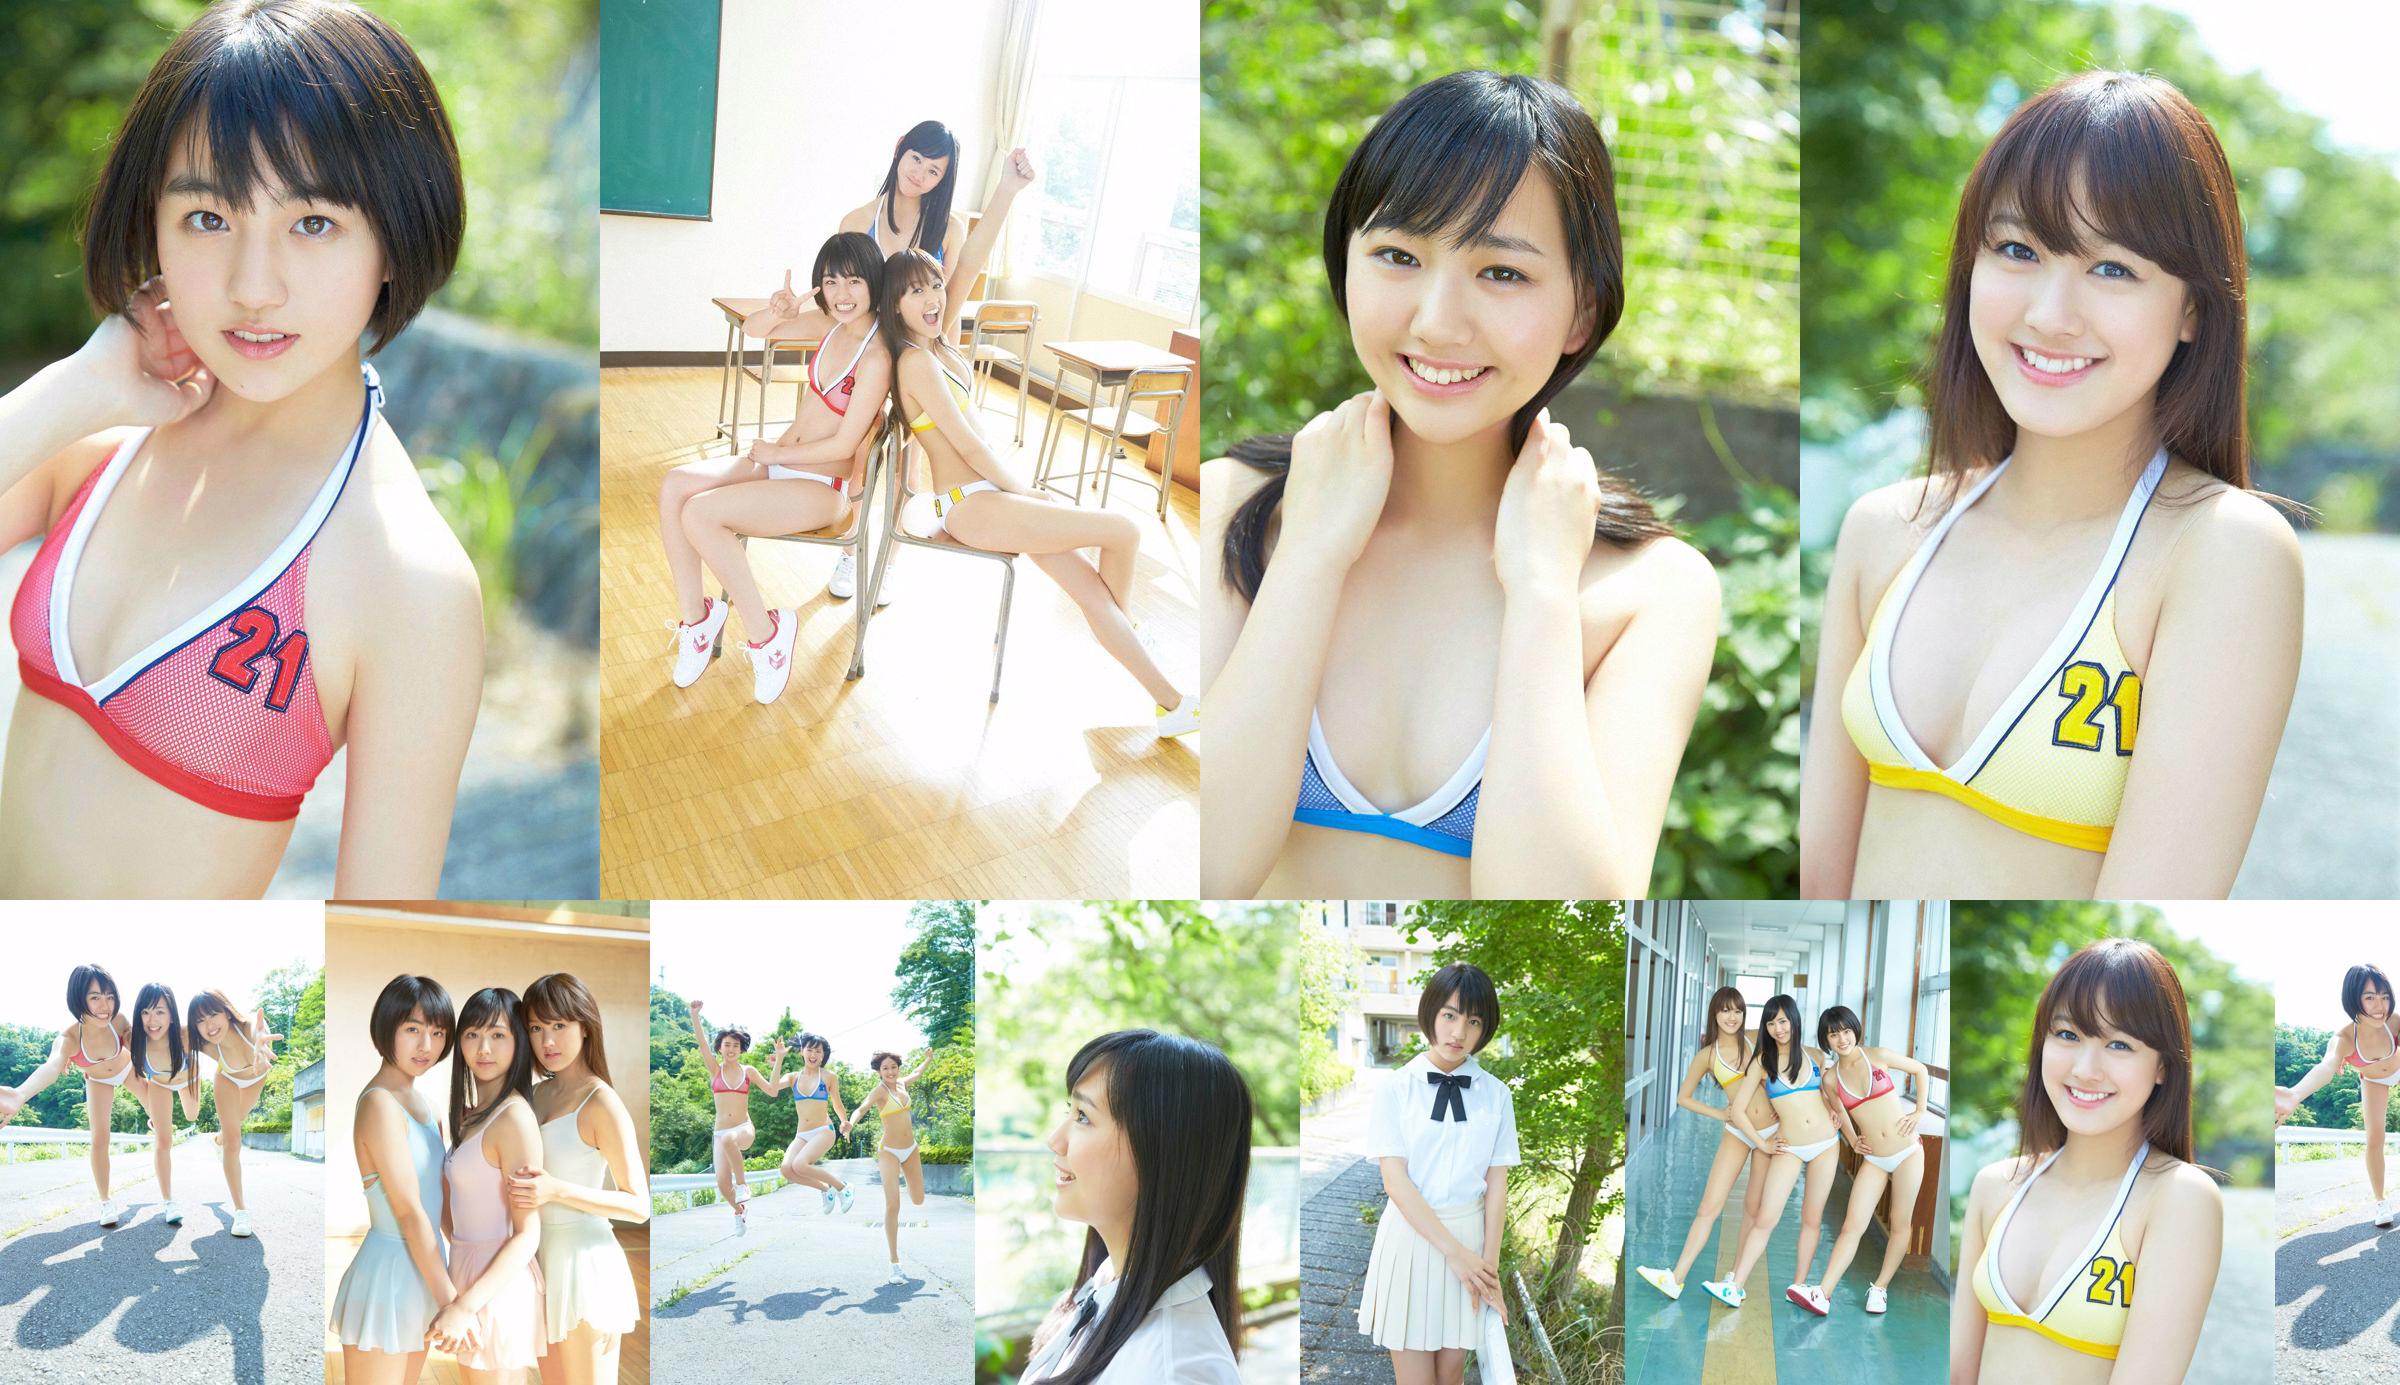 X21 Next Generation Unit X21 << Fall in Love with a Beautiful Girl Summer >> [YS Web] Vol.611 No.541f1f Page 1